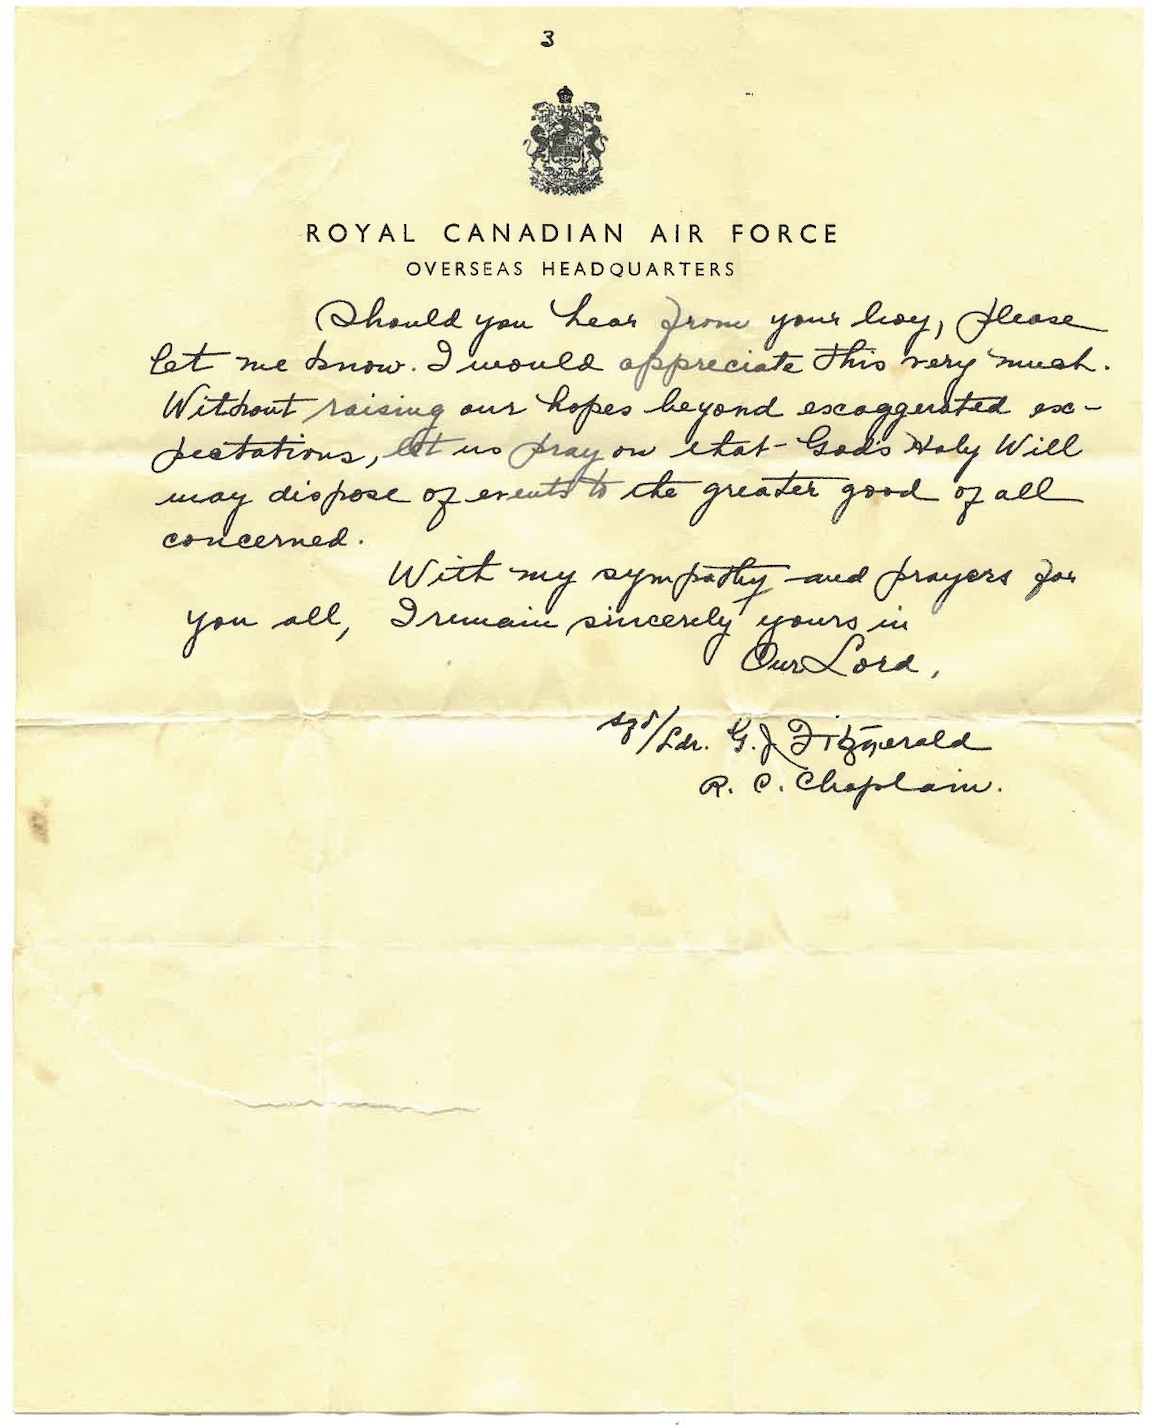 Letter to Mr. and Mrs. Beattie from F.G. Fitzgerald, R.C. Chaplain. Photo: NVMA Fonds 41, file 3, Letter June 17, 1944.